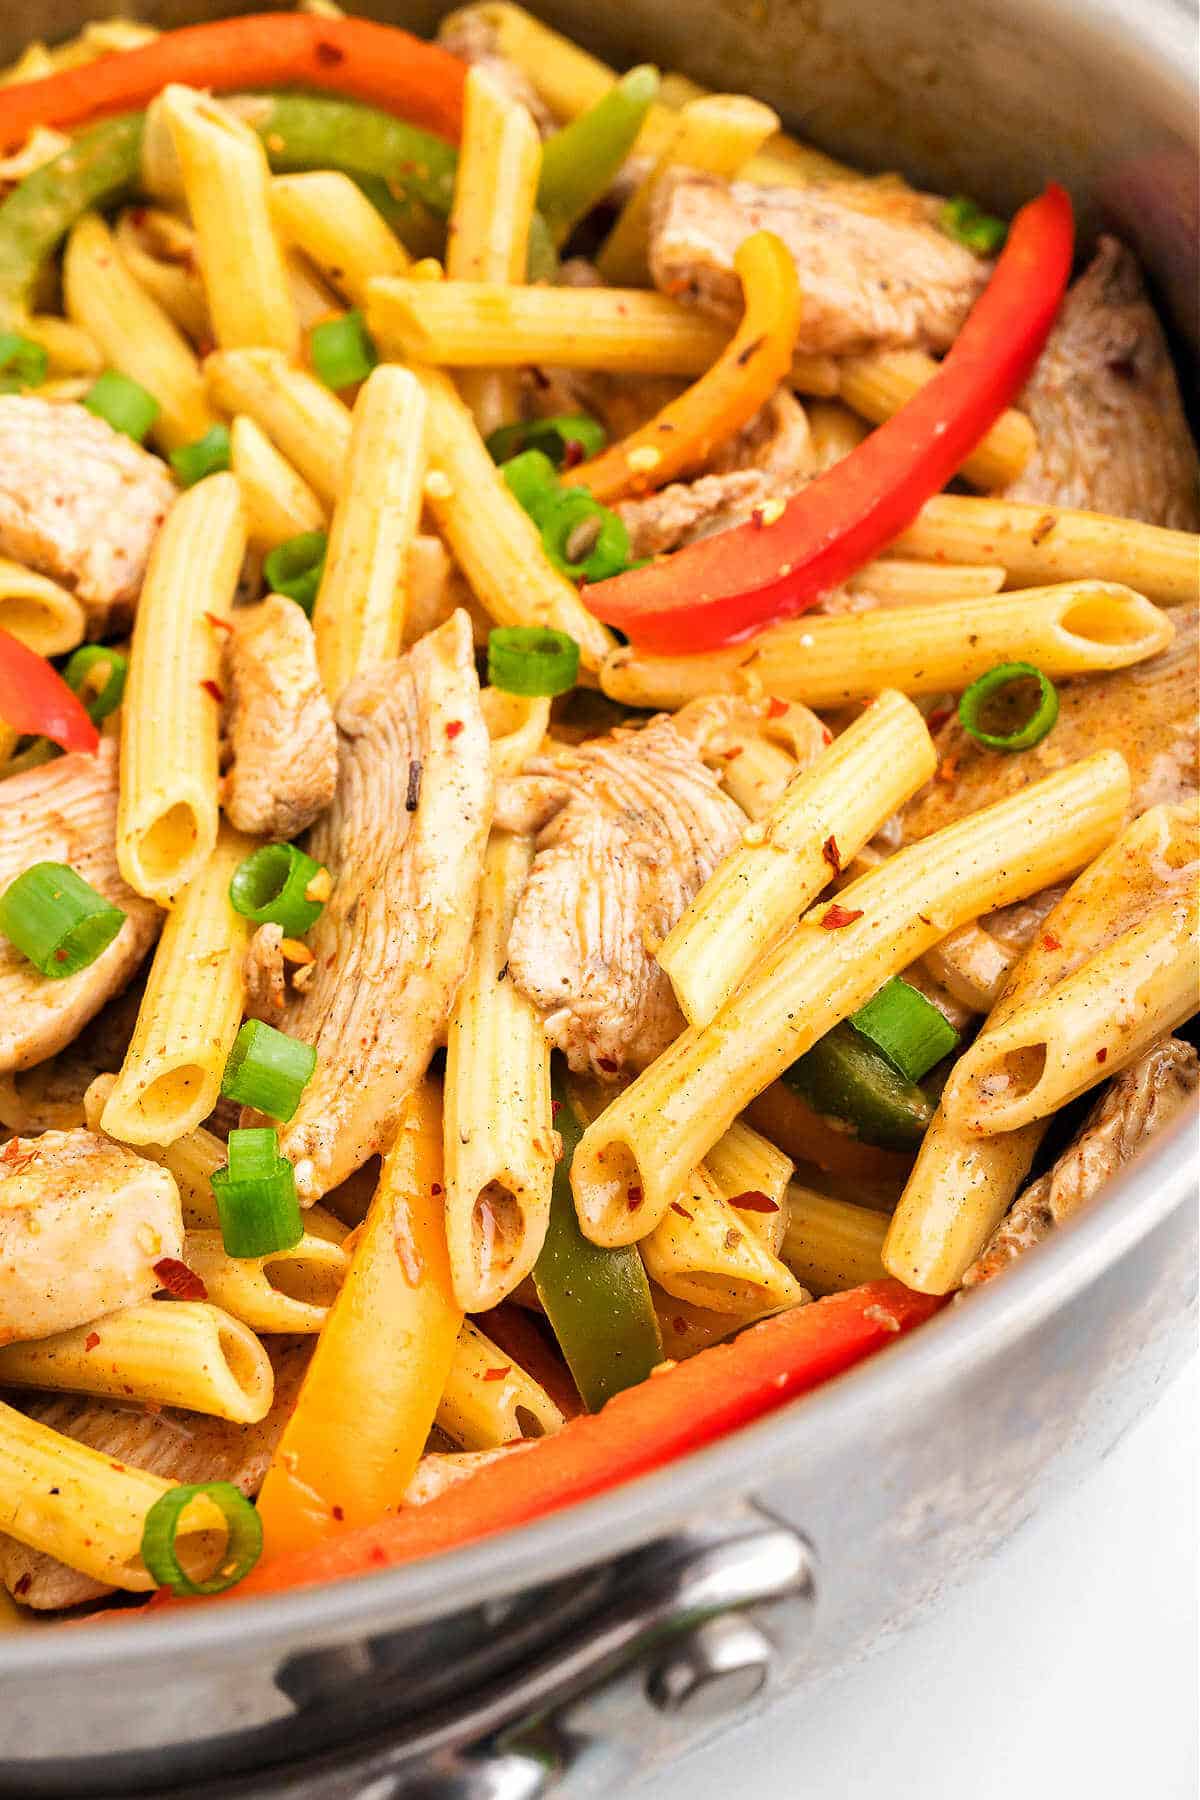 Penne pasta with bell peppers and chicken in a jerk sauce in a skillet.